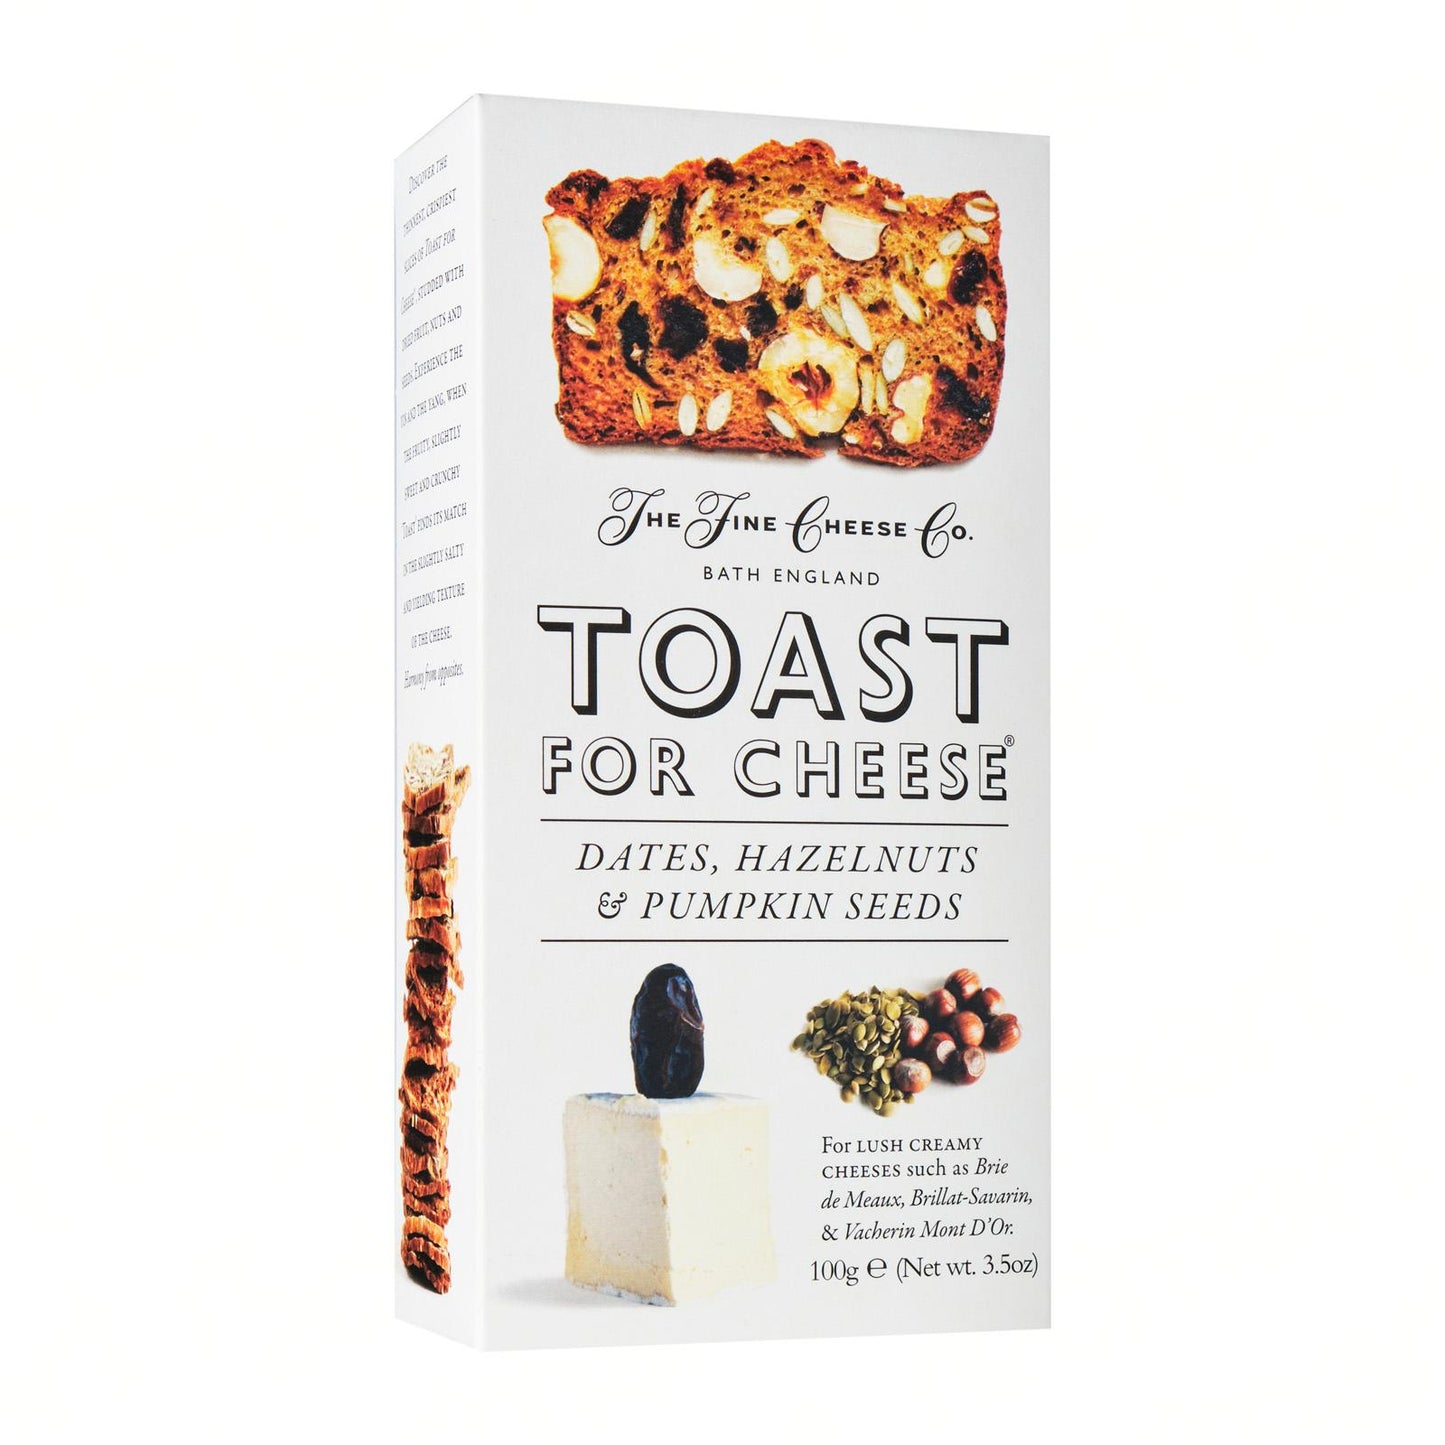 TOAST FOR CHEESE RANGE